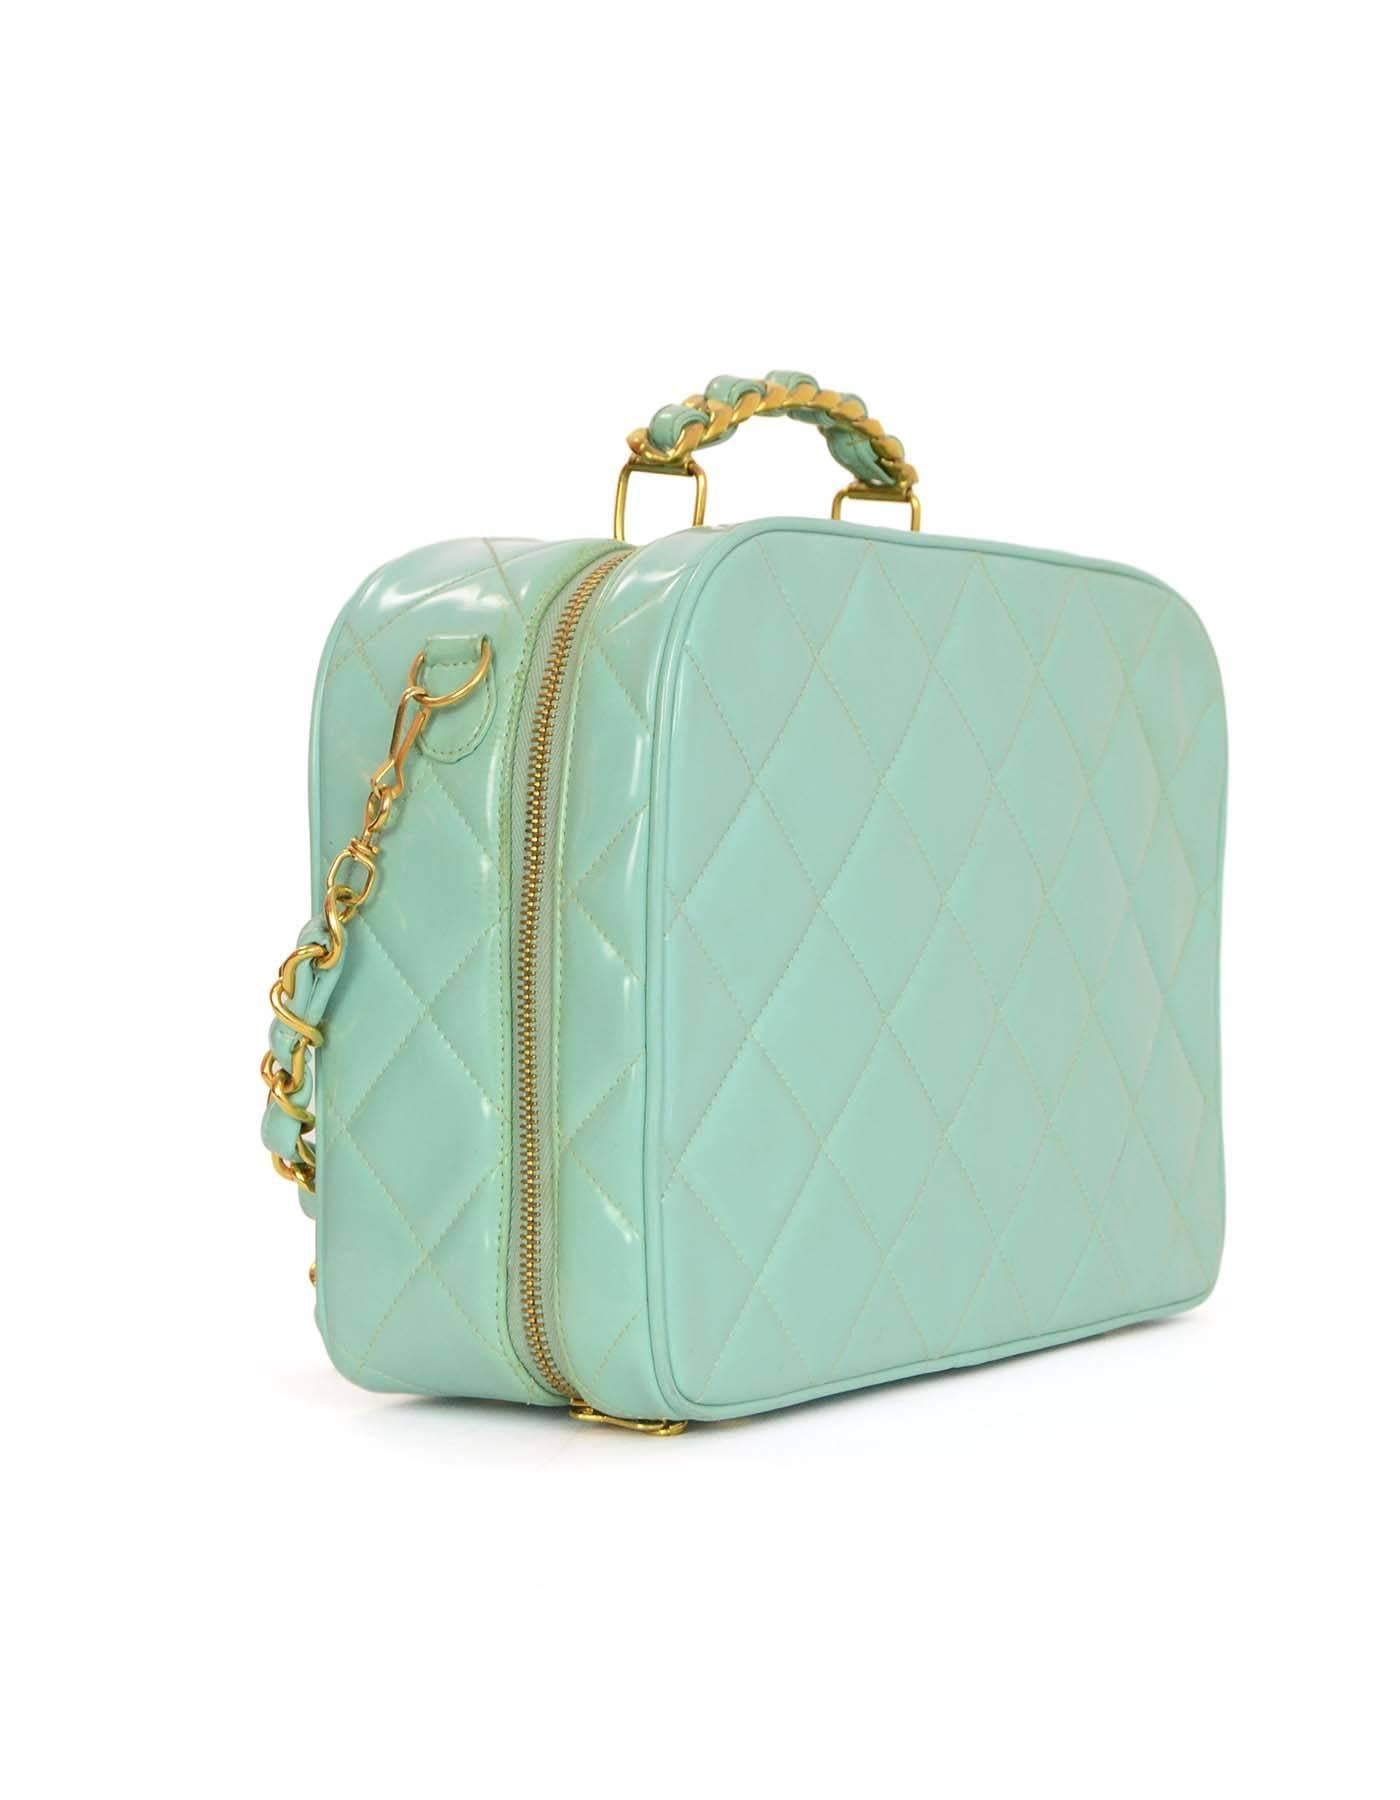 Chanel Quilted Patent Vanity Bag 
Features optional teal patent leather woven chain link shoulder strap
Made In: France
Year of Production: 1994-1996
Color: Teal
Hardware: Goldtone
Materials: Patent leather
Lining: Teal